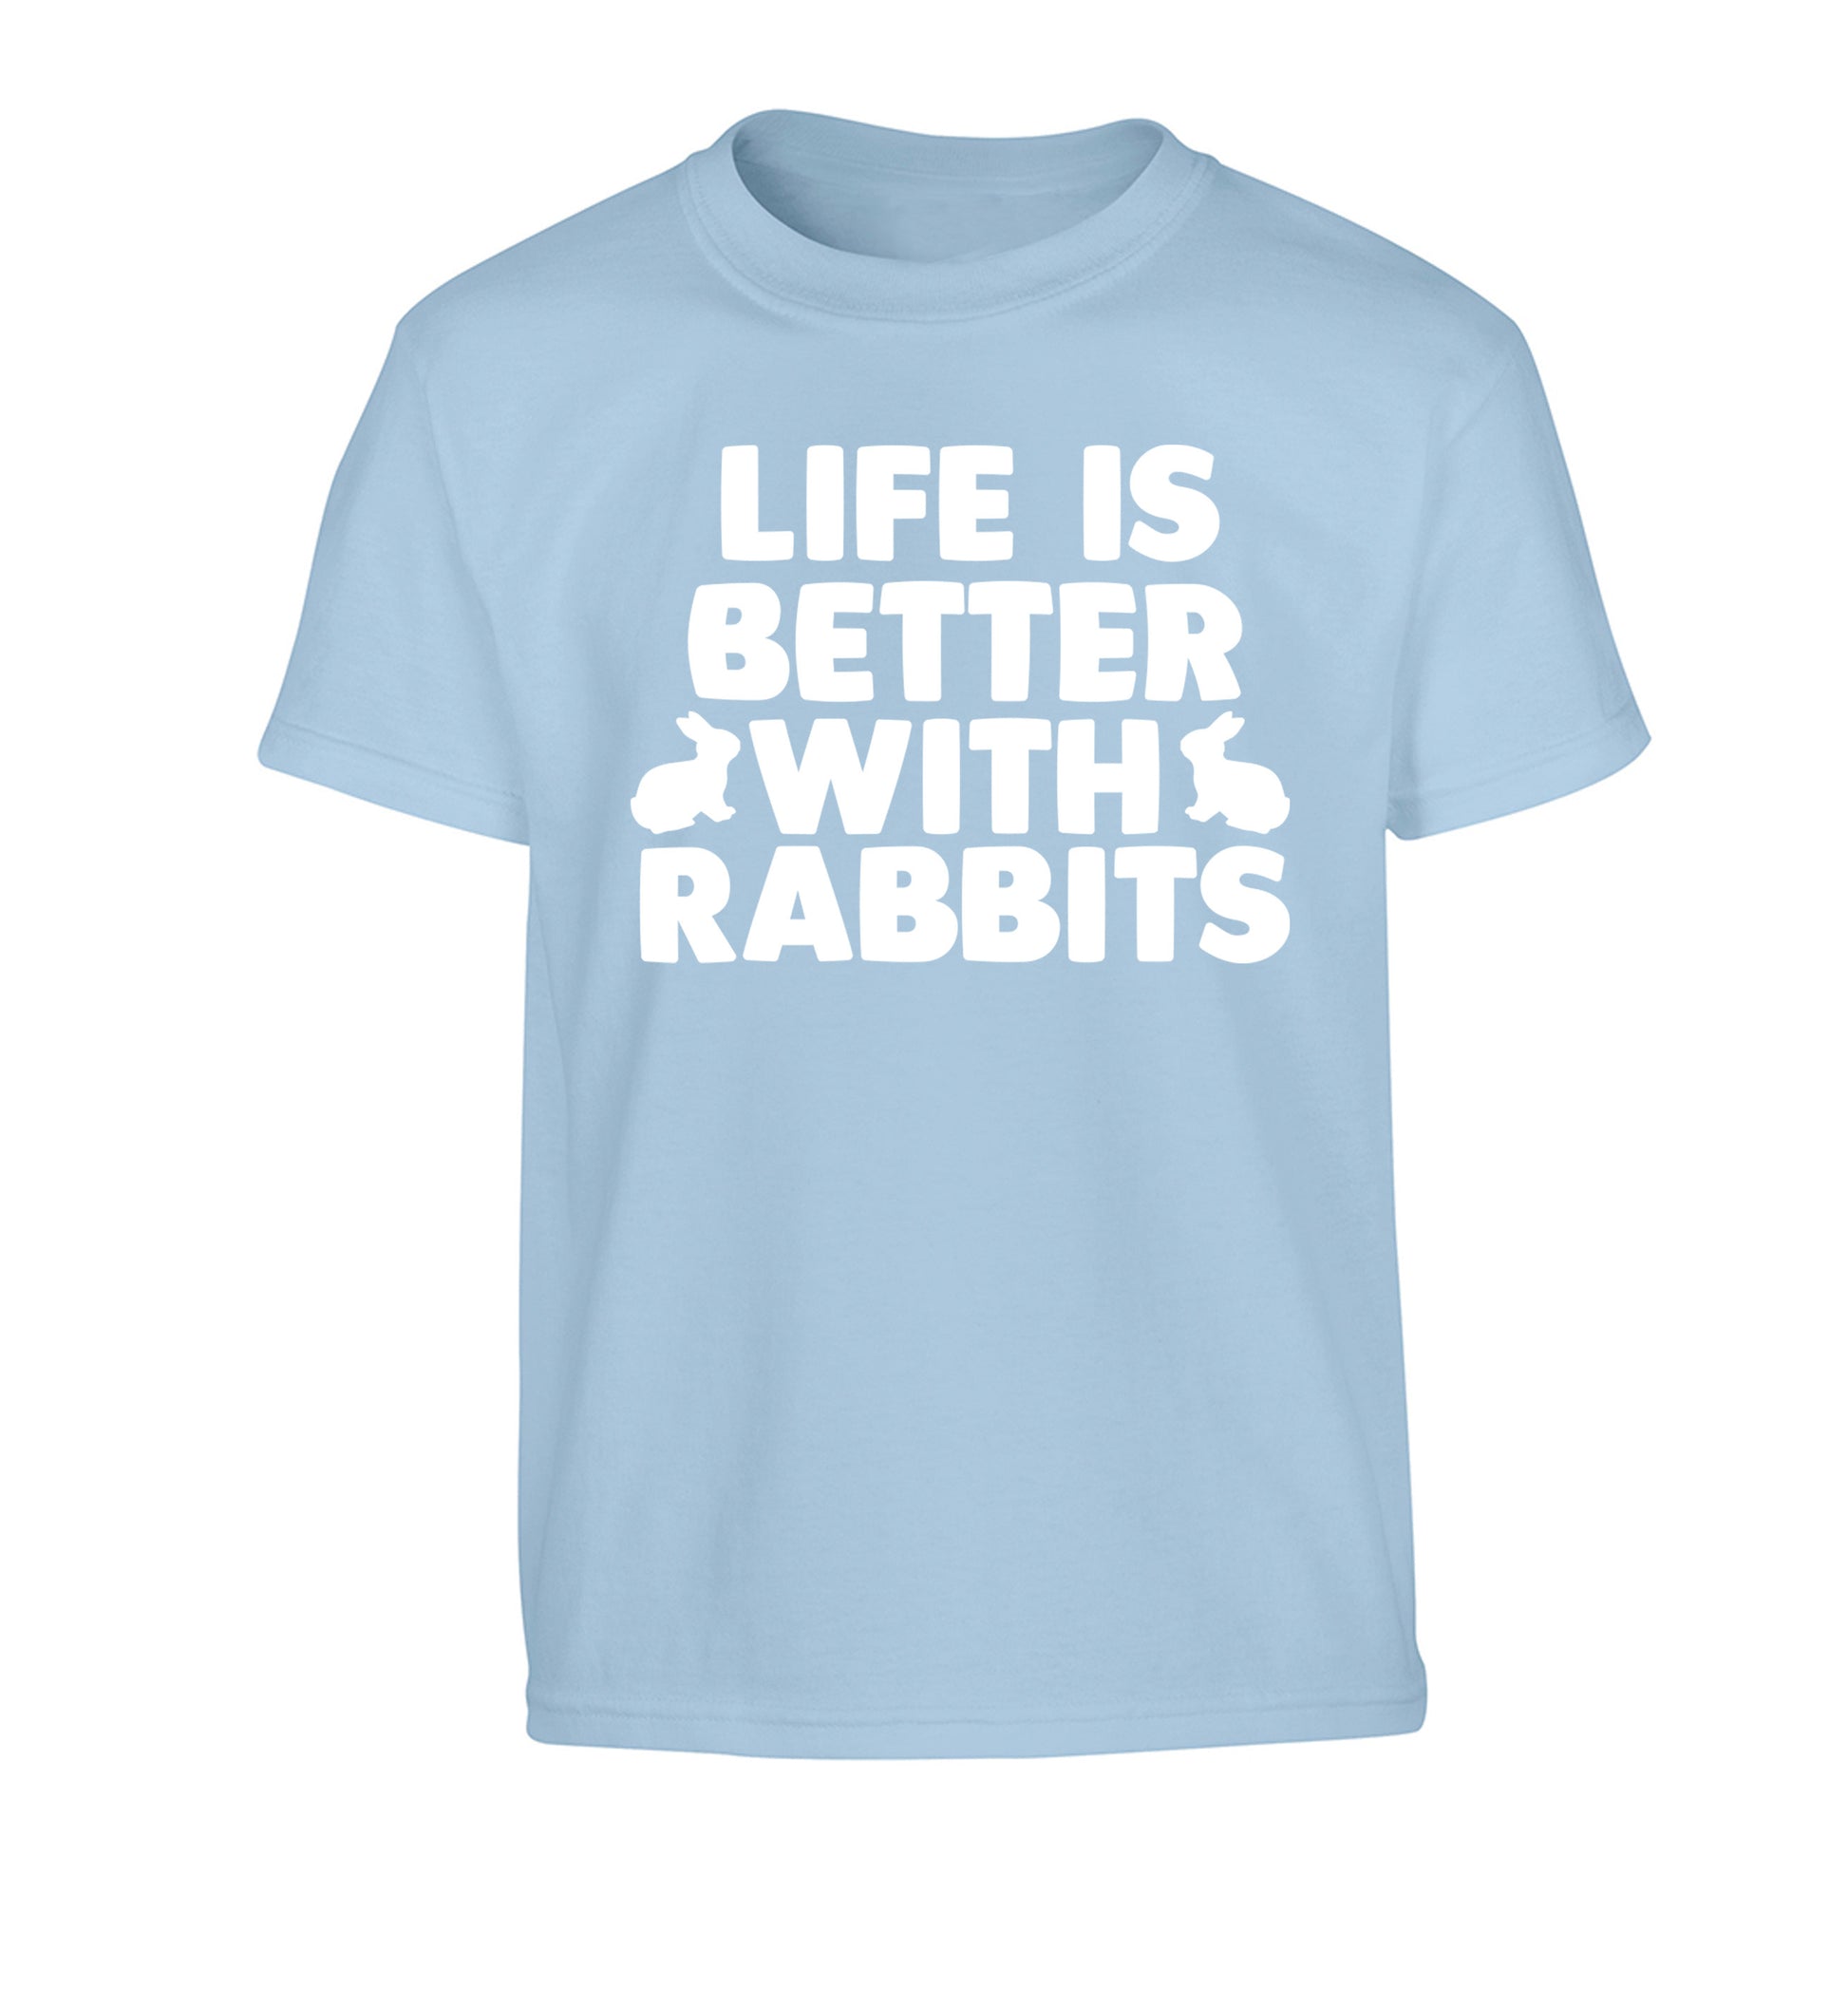 Life is better with rabbits Children's light blue Tshirt 12-14 Years